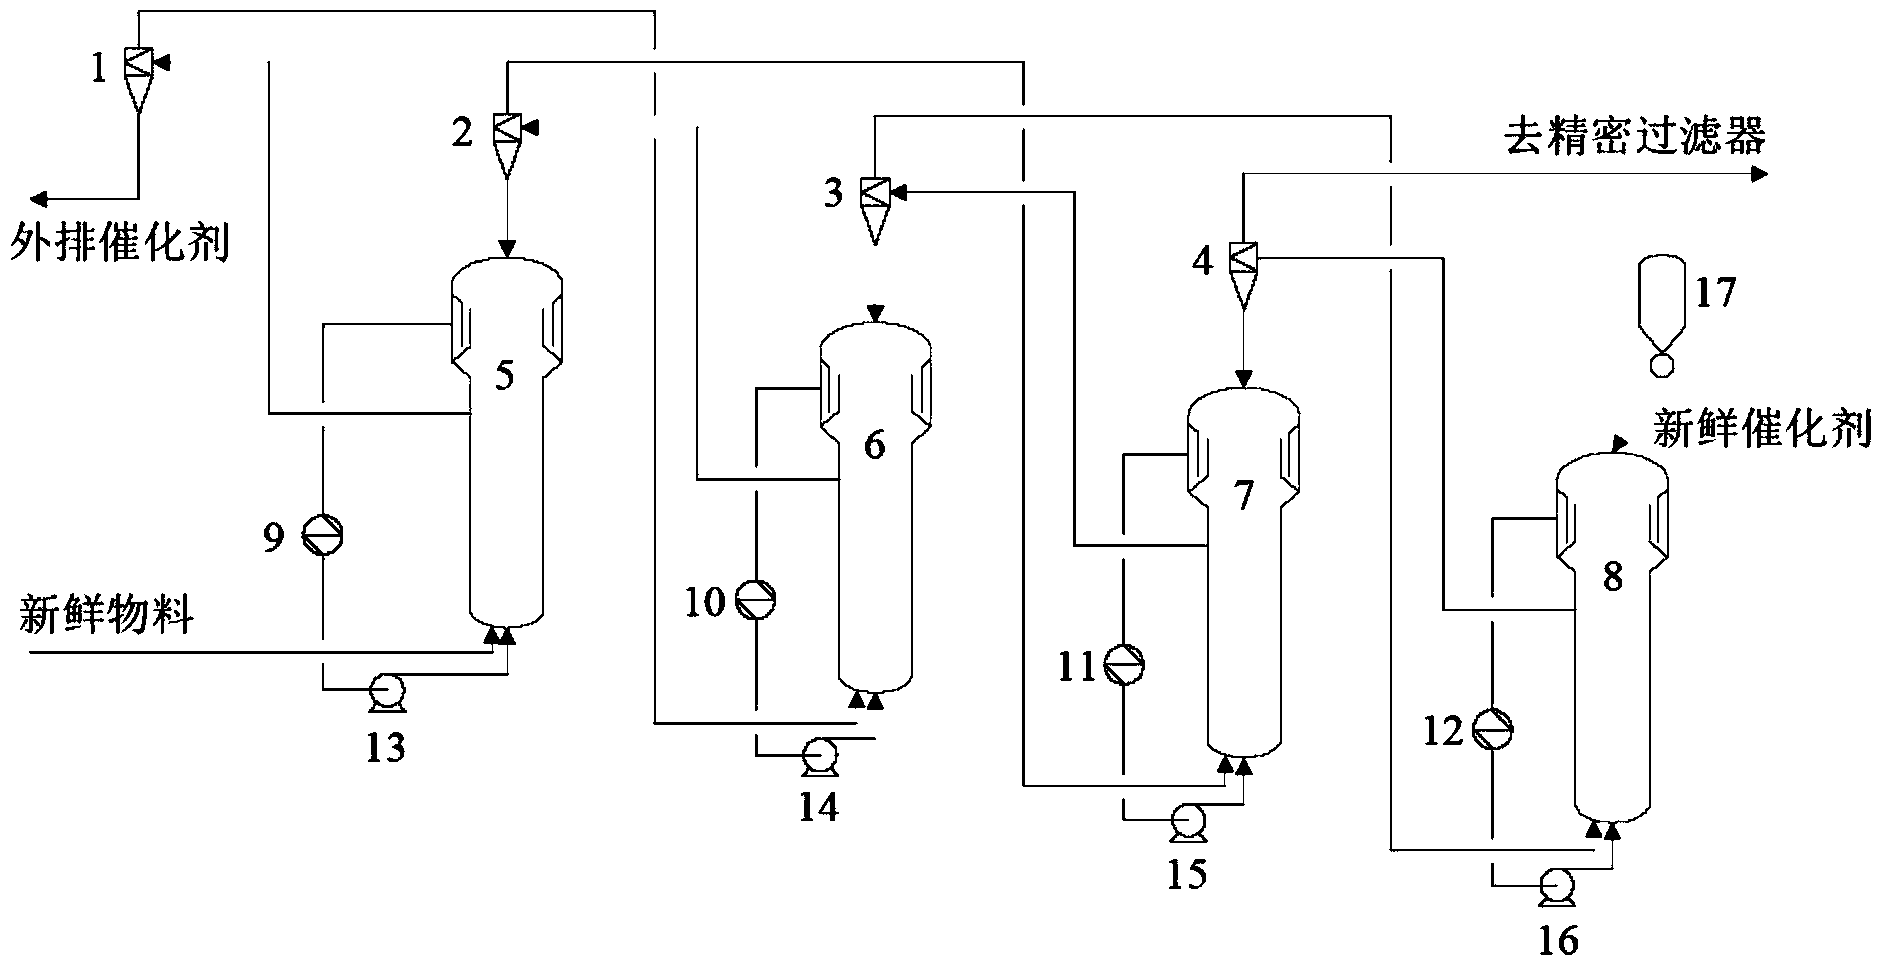 Continuous isosynthesis method and continuous isosynthesis device of ethylidene norbornene